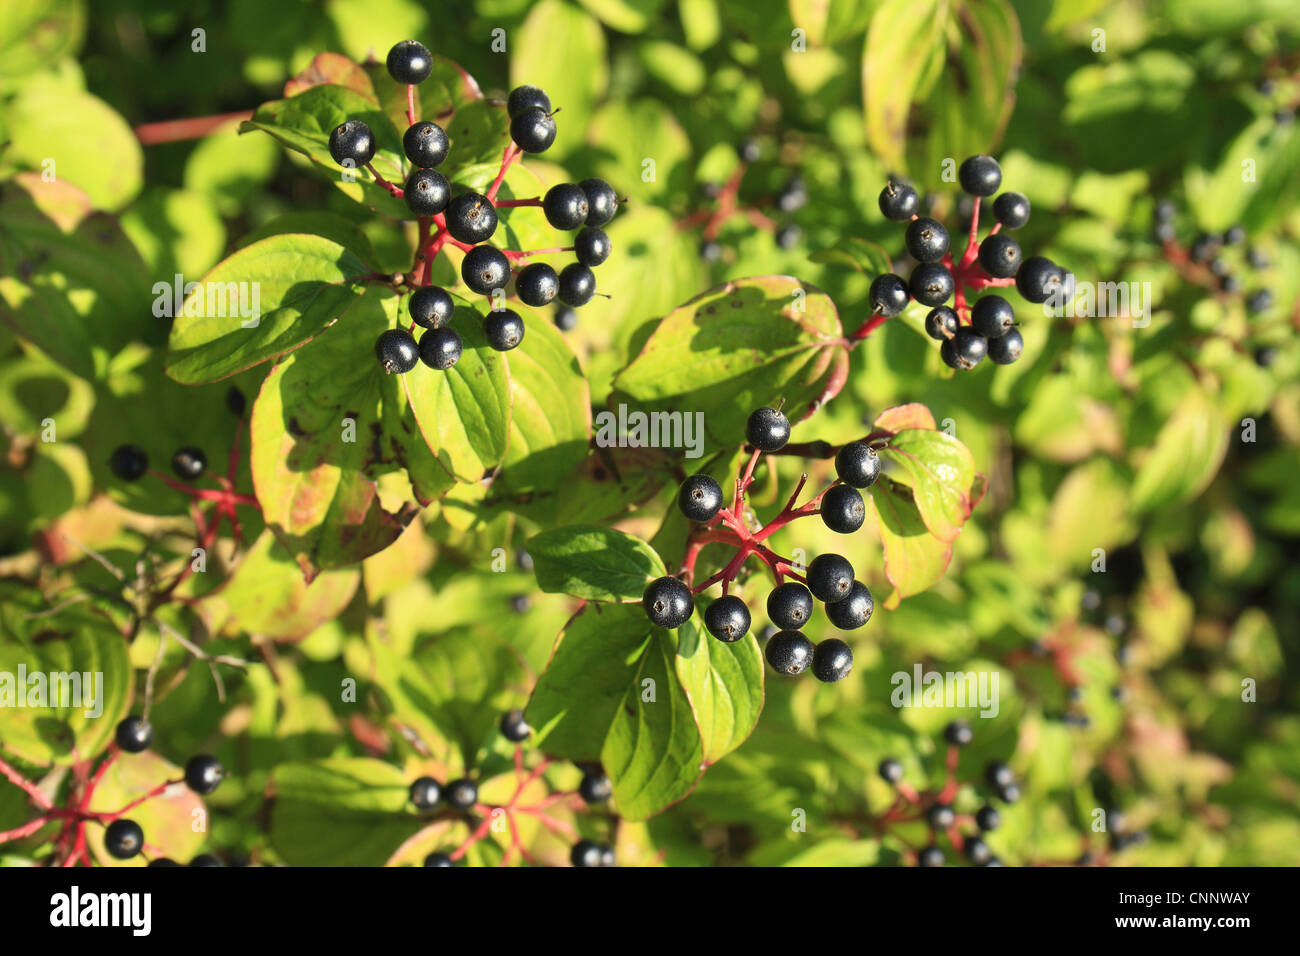 Common Dogwood (Cornus sanguinea) close-up of berries and leaves, growing in hedgerow, Bacton, Suffolk, England, september Stock Photo